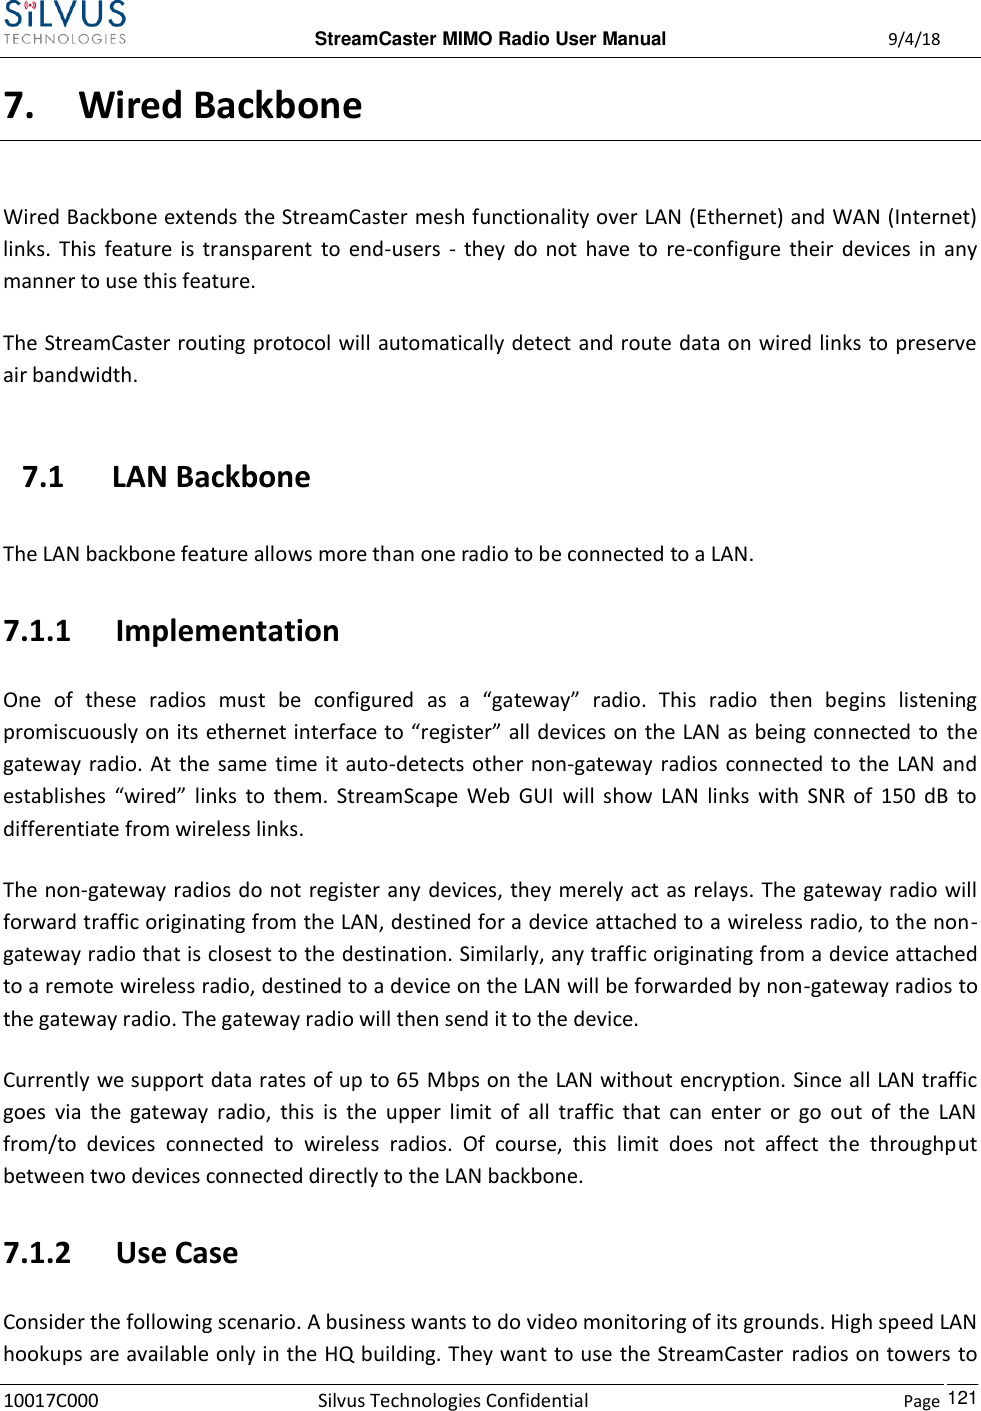  StreamCaster MIMO Radio User Manual  9/4/18 10017C000 Silvus Technologies Confidential    Page    121 7. Wired Backbone Wired Backbone extends the StreamCaster mesh functionality over LAN (Ethernet) and WAN (Internet) links.  This feature is  transparent  to  end-users  -  they  do  not  have to  re-configure  their  devices  in  any manner to use this feature. The StreamCaster routing protocol will automatically detect and route data on wired links to preserve air bandwidth. 7.1 LAN Backbone The LAN backbone feature allows more than one radio to be connected to a LAN. 7.1.1 Implementation One  of  these  radios  must  be  configured  as  a  “gateway”  radio.  This  radio  then  begins  listening promiscuously on its ethernet interface to “register” all devices on the LAN as being connected to the gateway radio.  At  the same  time it auto-detects other non-gateway radios connected to the LAN and establishes  “wired”  links  to  them.  StreamScape  Web  GUI  will  show  LAN  links  with  SNR  of  150  dB  to differentiate from wireless links. The non-gateway radios do not register any devices, they merely act as relays. The gateway radio will forward traffic originating from the LAN, destined for a device attached to a wireless radio, to the non-gateway radio that is closest to the destination. Similarly, any traffic originating from a device attached to a remote wireless radio, destined to a device on the LAN will be forwarded by non-gateway radios to the gateway radio. The gateway radio will then send it to the device. Currently we support data rates of up to 65 Mbps on the LAN without encryption. Since all LAN traffic goes  via  the  gateway  radio,  this  is  the  upper  limit  of  all  traffic  that  can  enter  or  go  out  of  the  LAN from/to  devices  connected  to  wireless  radios.  Of  course,  this  limit  does  not  affect  the  throughput between two devices connected directly to the LAN backbone. 7.1.2 Use Case Consider the following scenario. A business wants to do video monitoring of its grounds. High speed LAN hookups are available only in the HQ building. They want to use the StreamCaster radios on towers to 